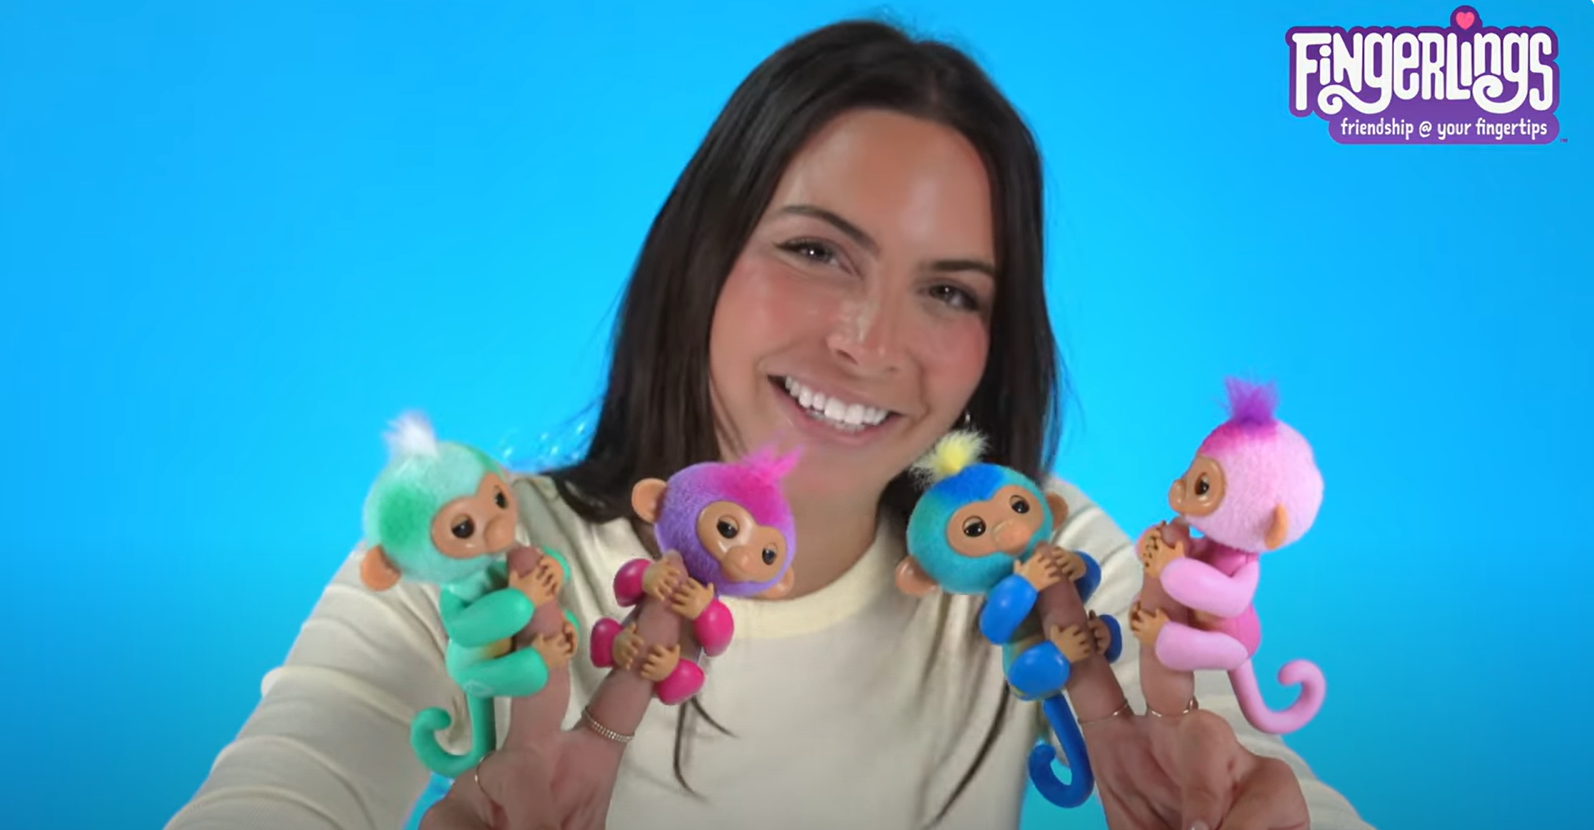 Fingerlings: How-To Video!